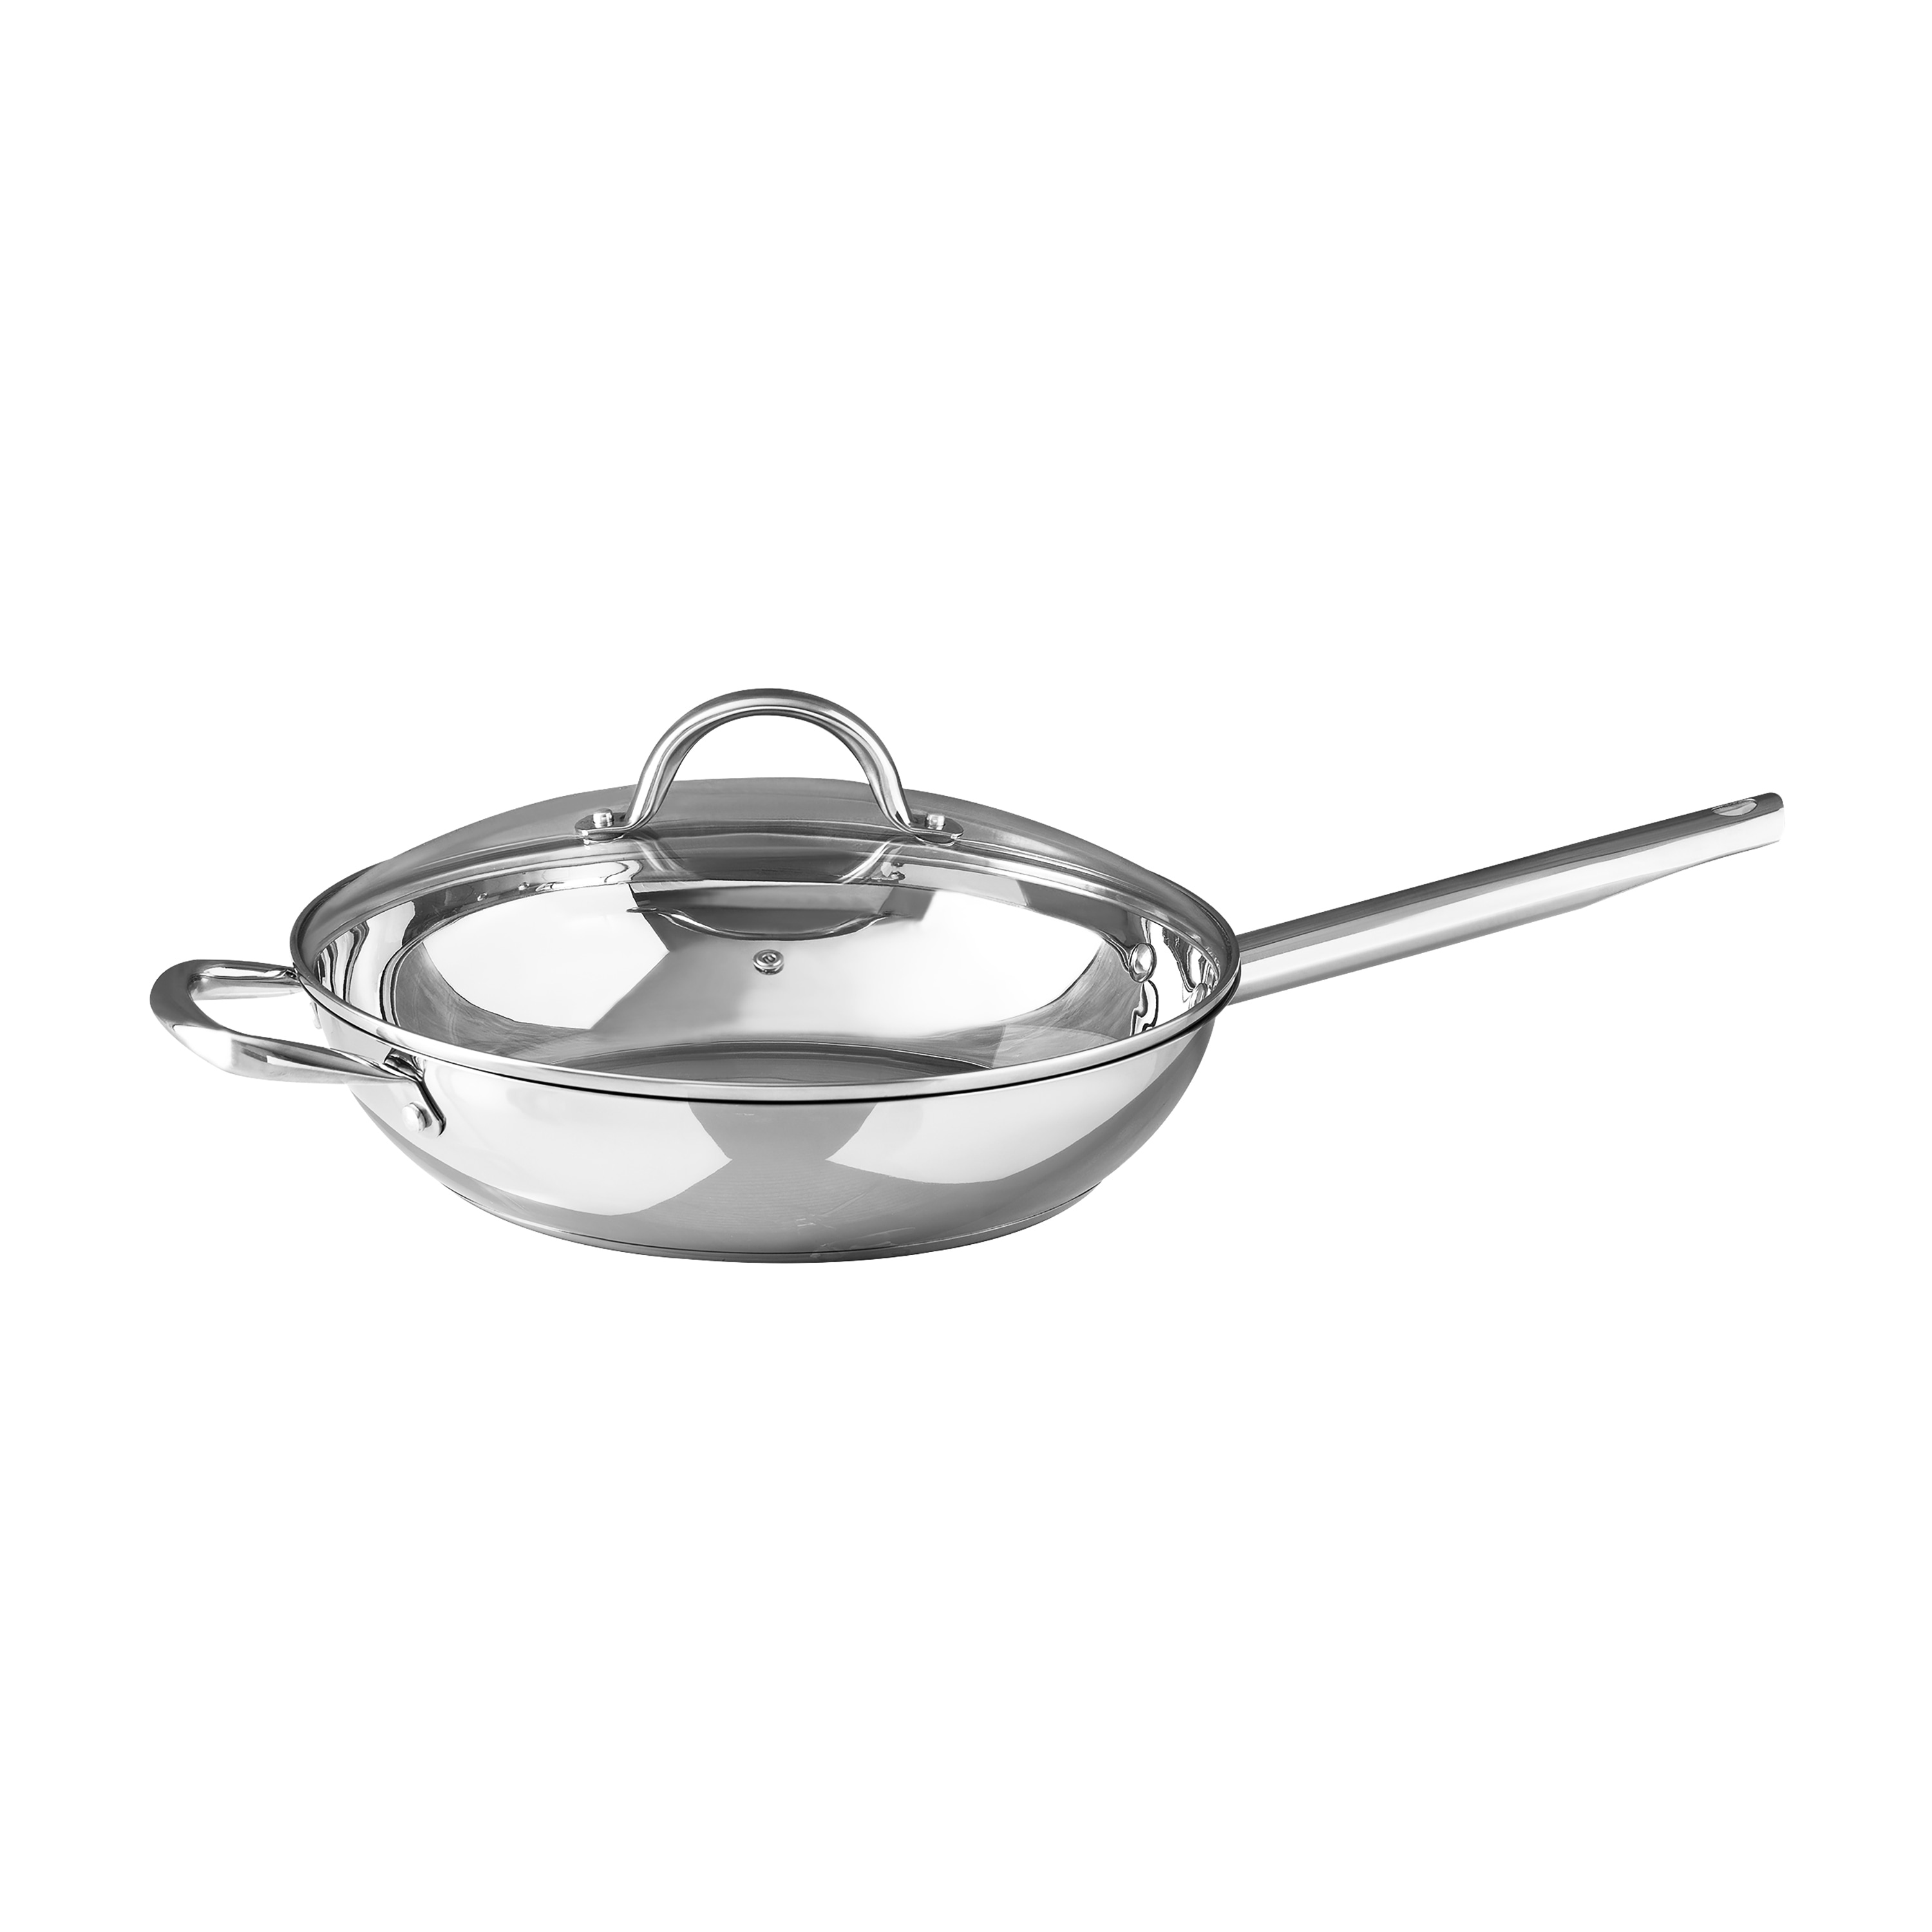 https://ak1.ostkcdn.com/images/products/is/images/direct/dd42ea95328b876f086eb1447ba1da3685789ff0/Bergner-BGUS10115STS-12-Inch-Fry-Pan-Stainless-Steel-Dishwasher-Safe-Induction-Ready-with-Lid.jpg